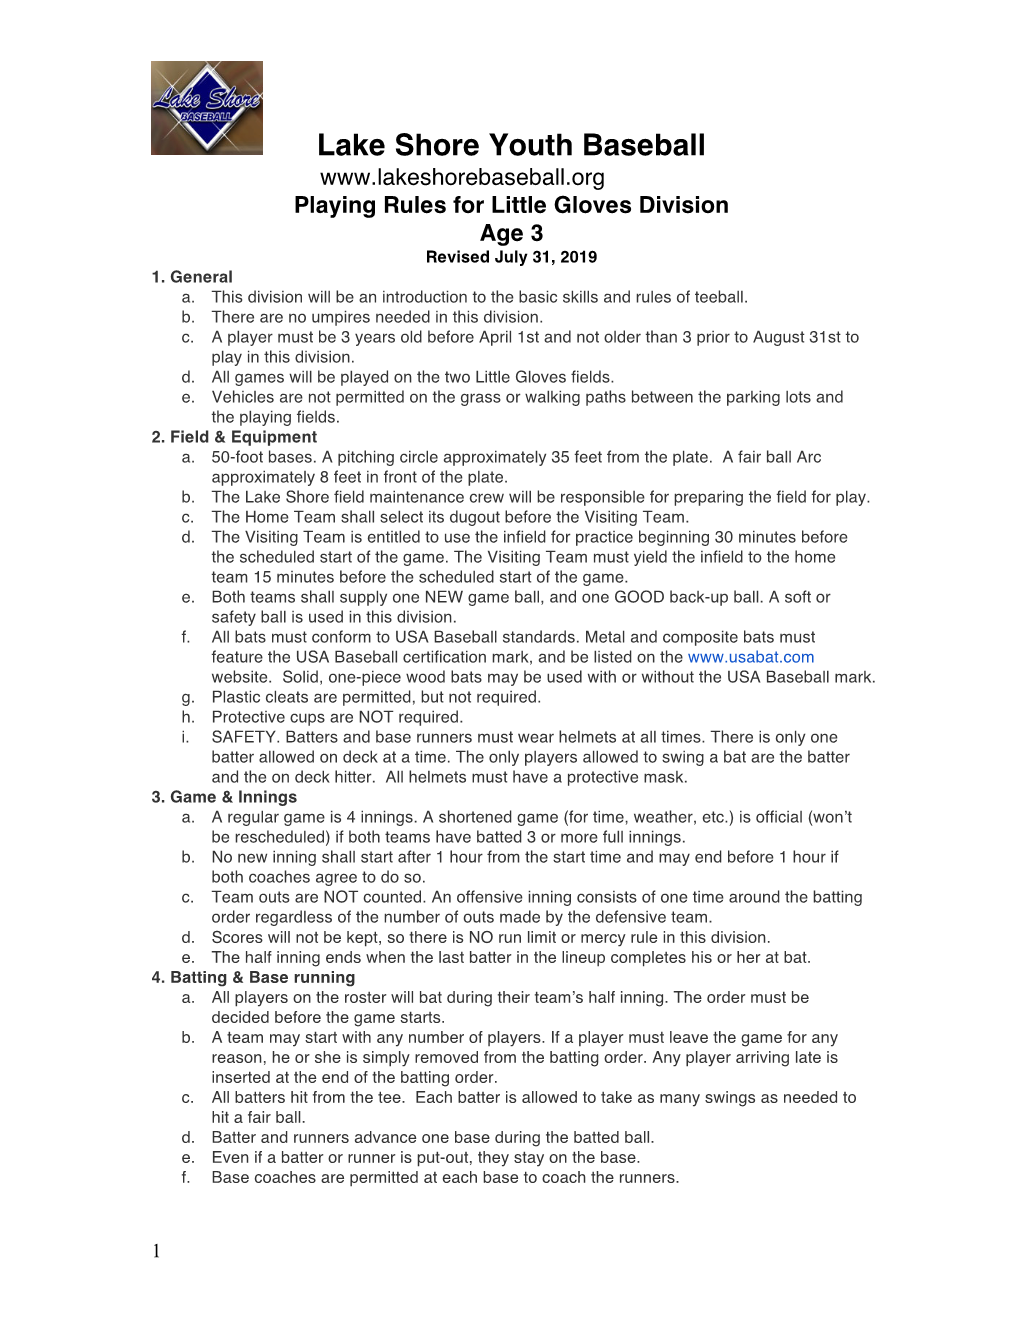 Lake Shore Youth Baseball Playing Rules for Little Gloves Division Age 3 Revised July 31, 2019 1